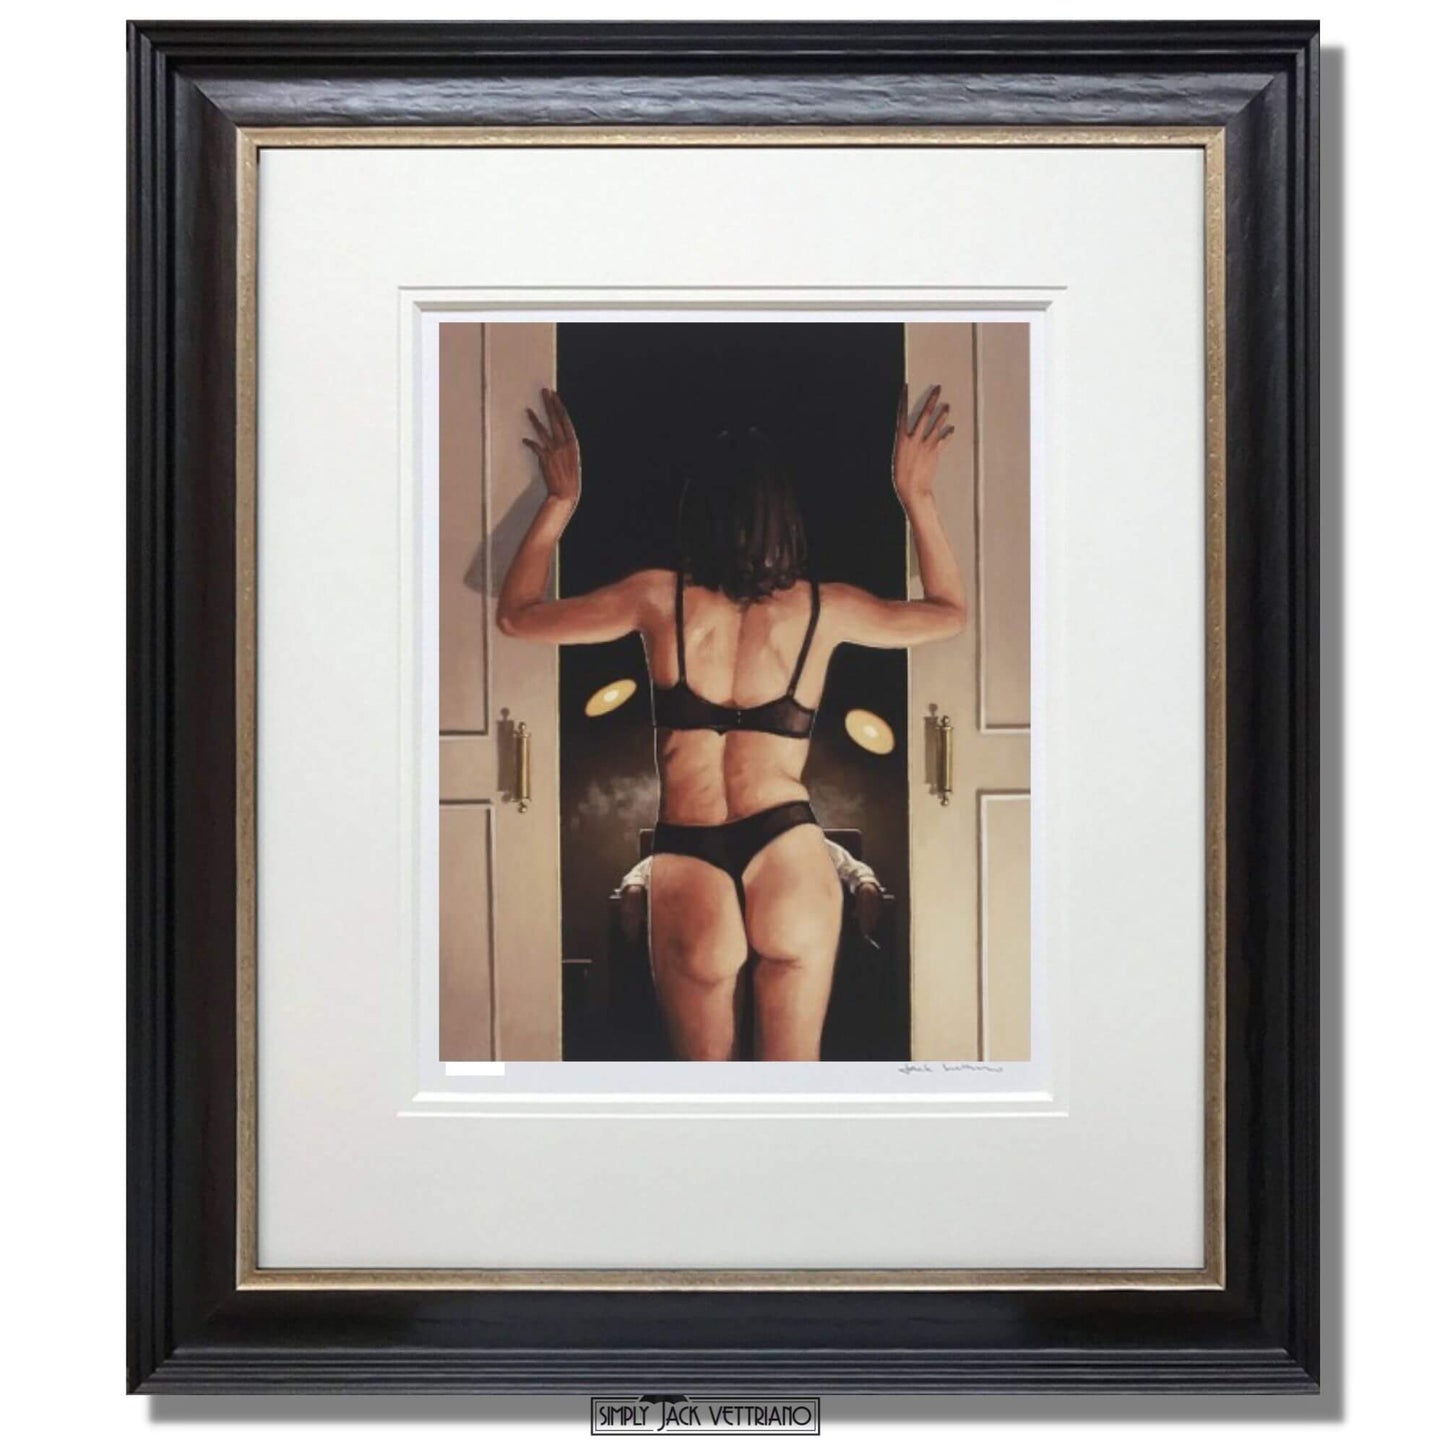 His Favourite Girl by Jack Vettriano Limited Edition Framed